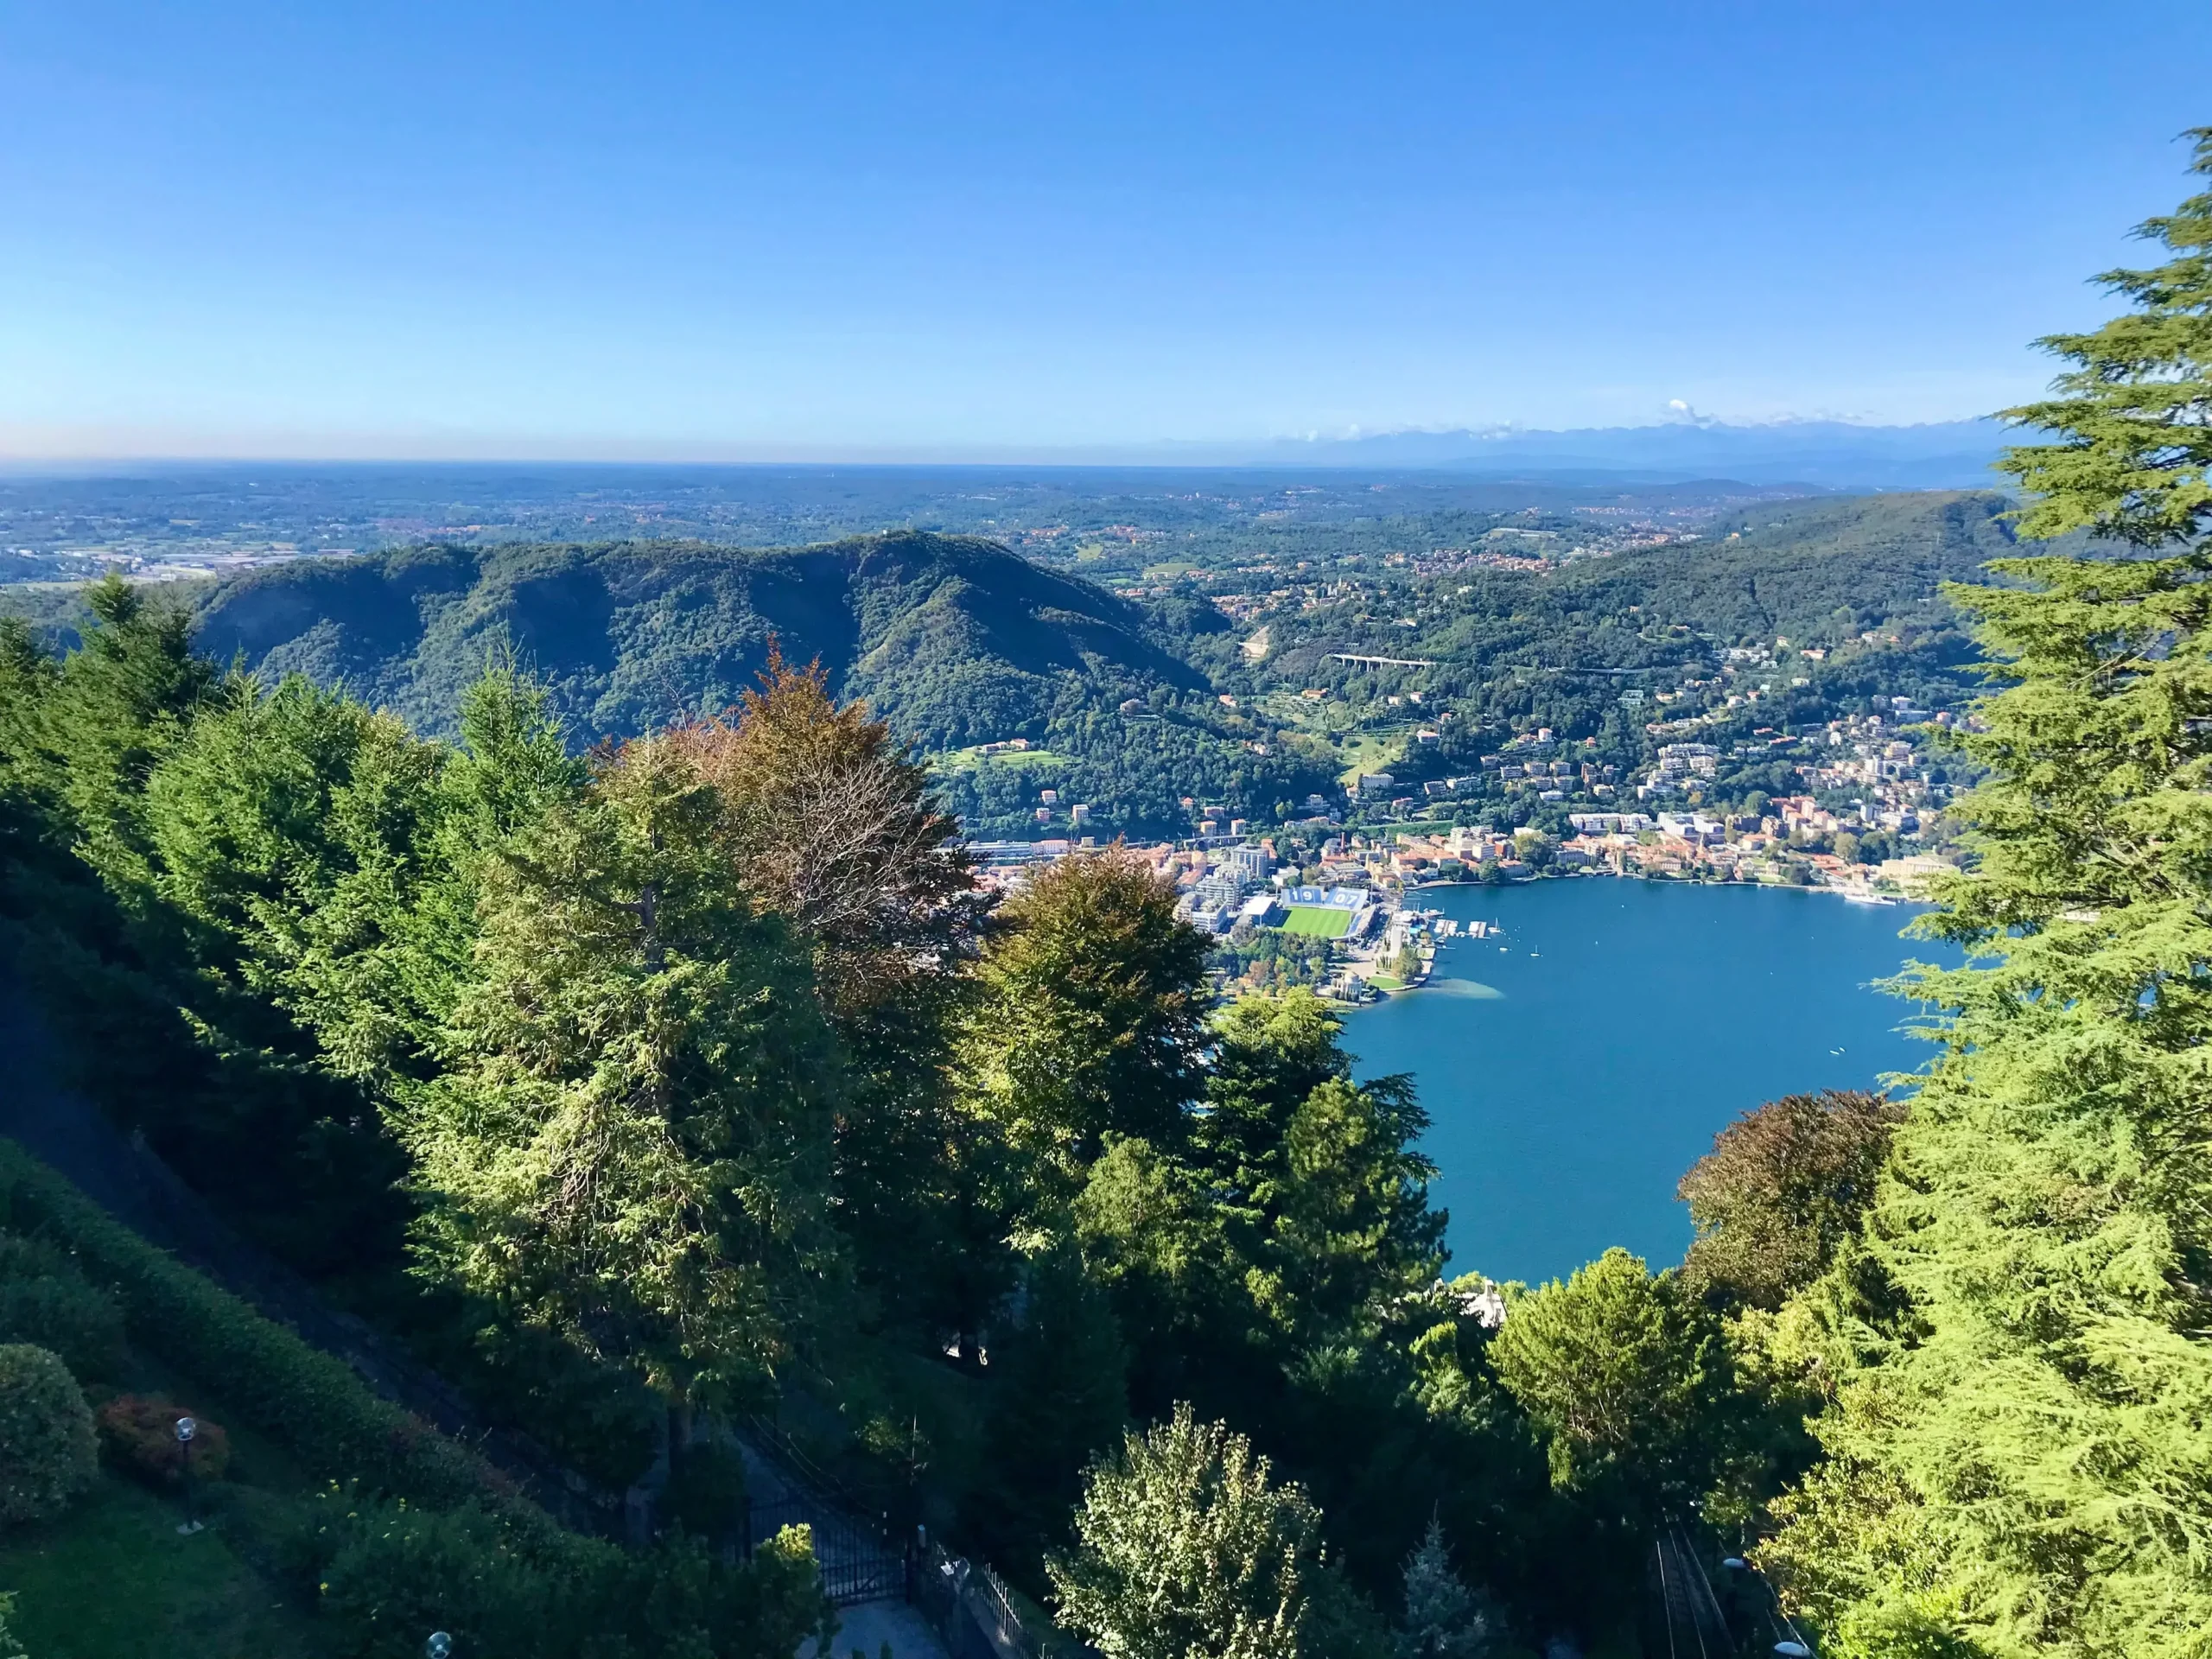 View of the town of Como from Brunate